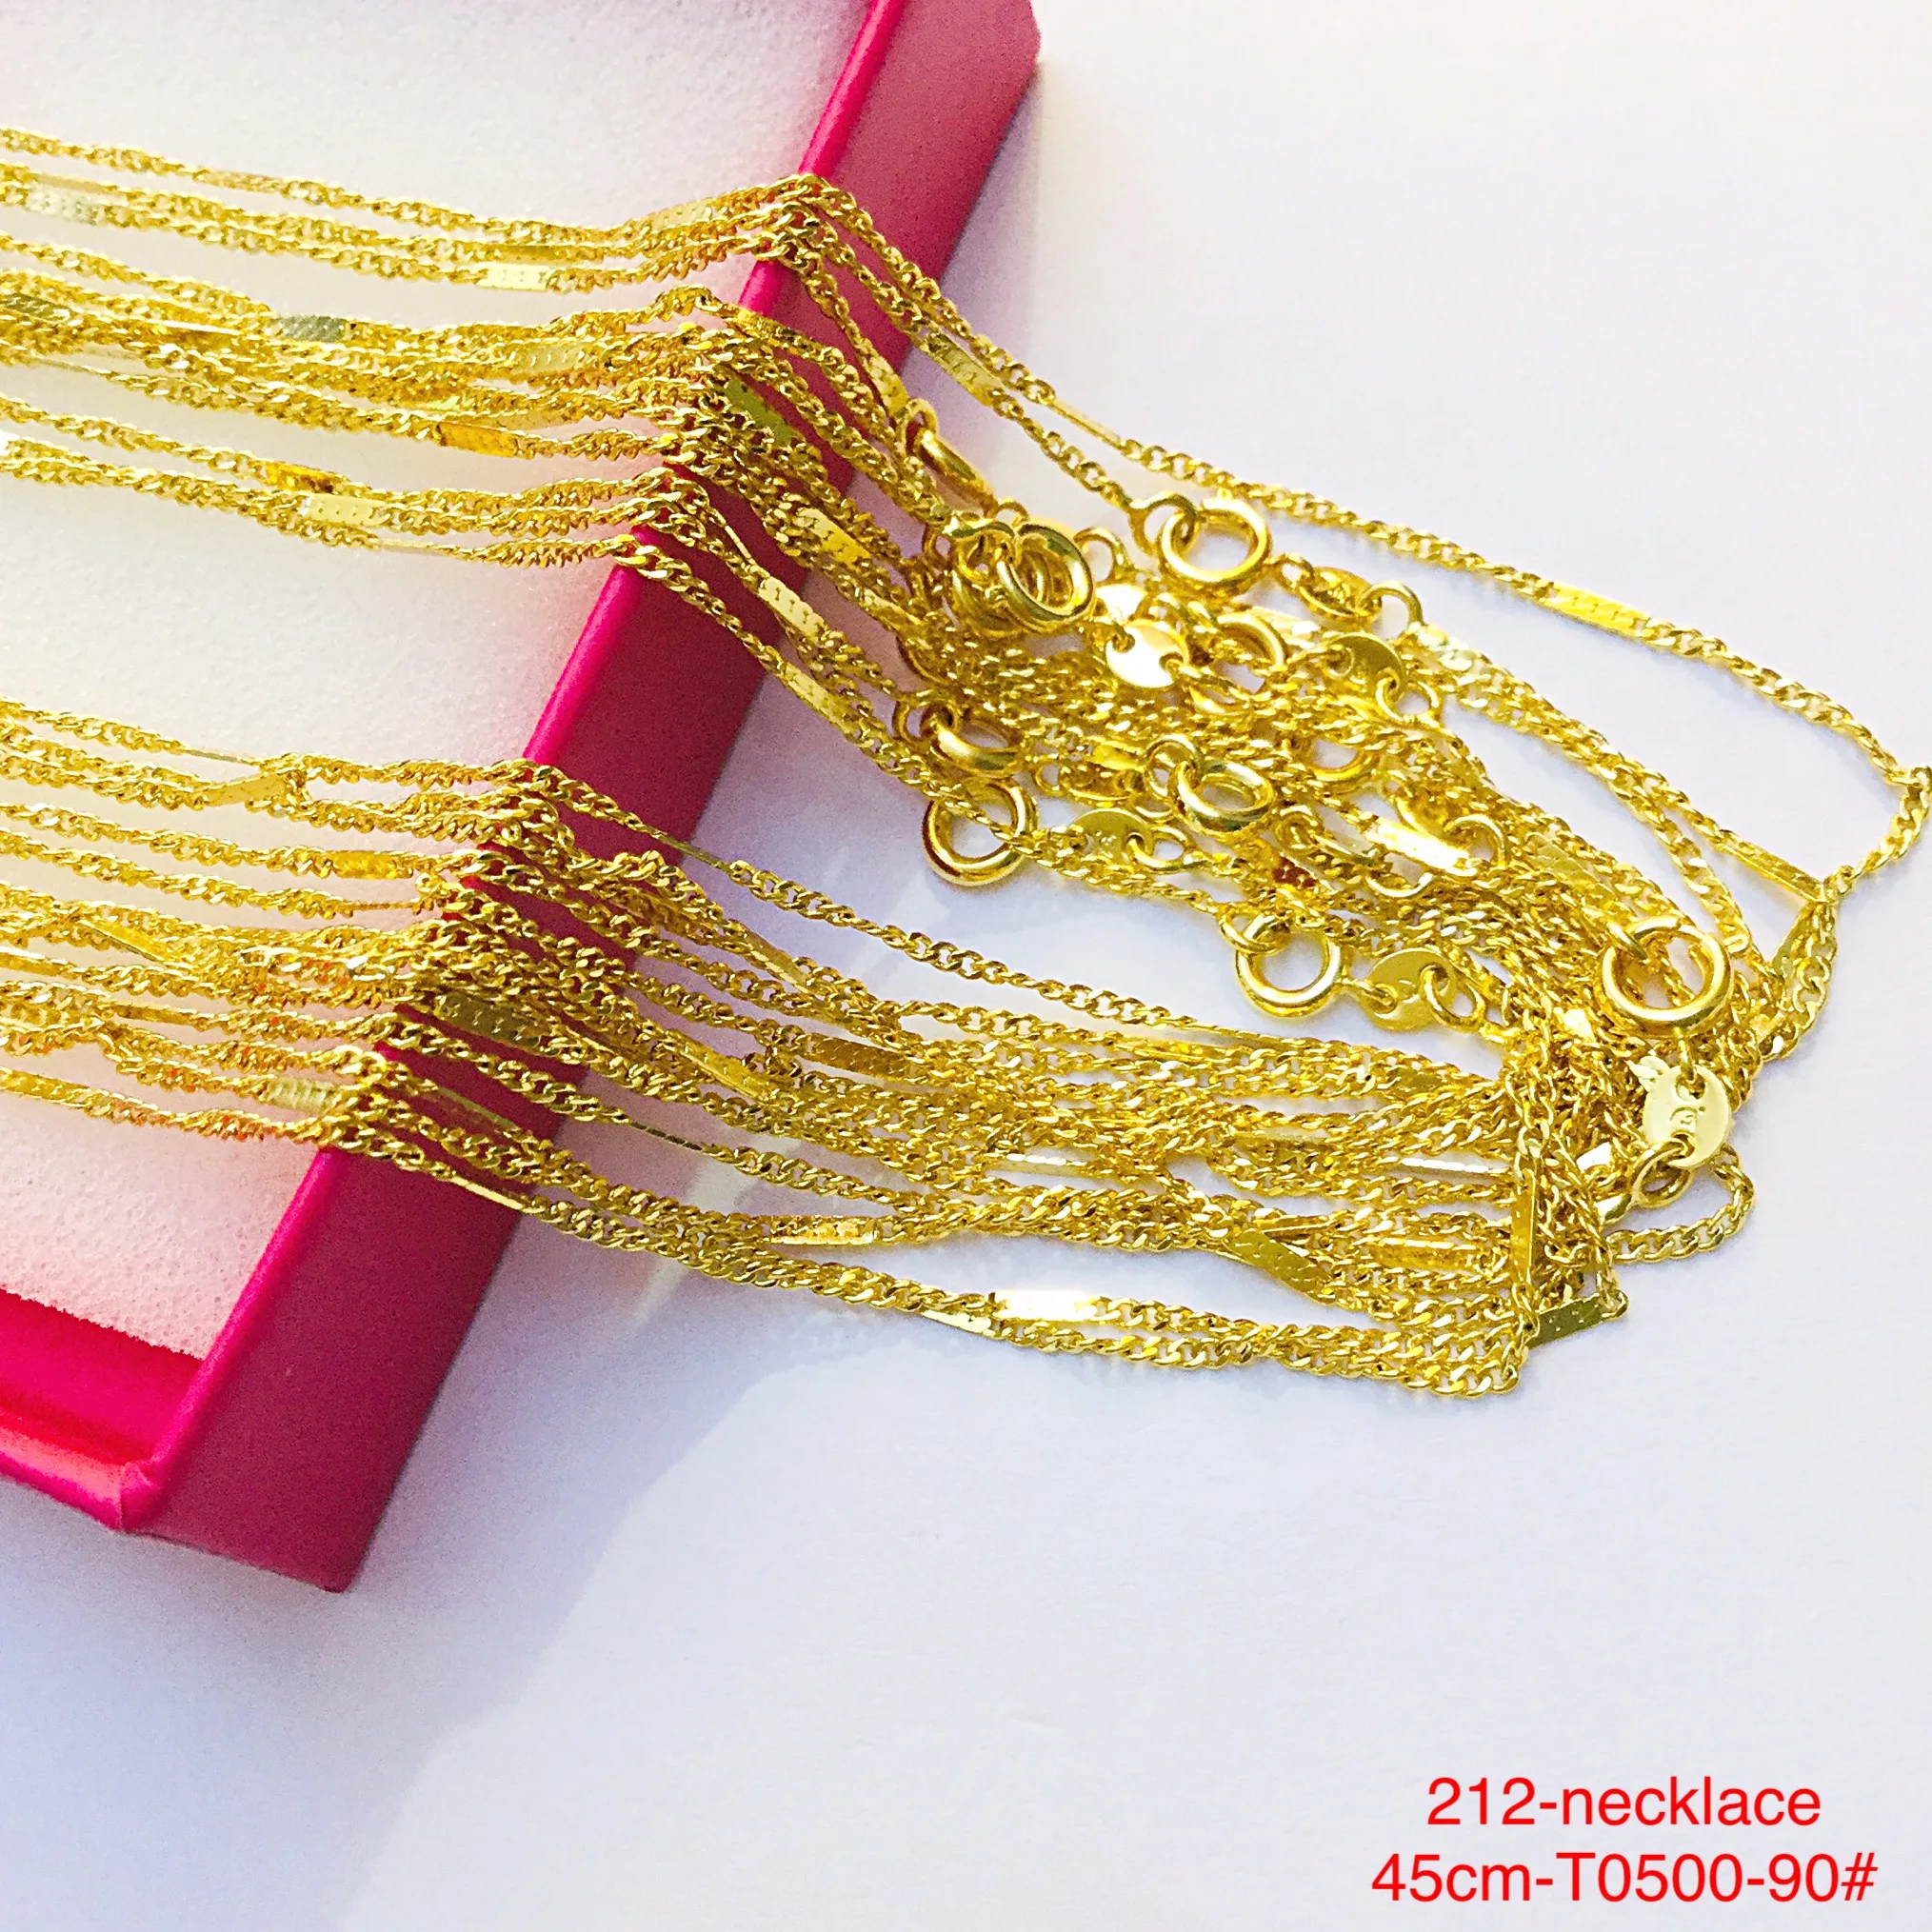 212 High quality fashion 24k gold chain necklace